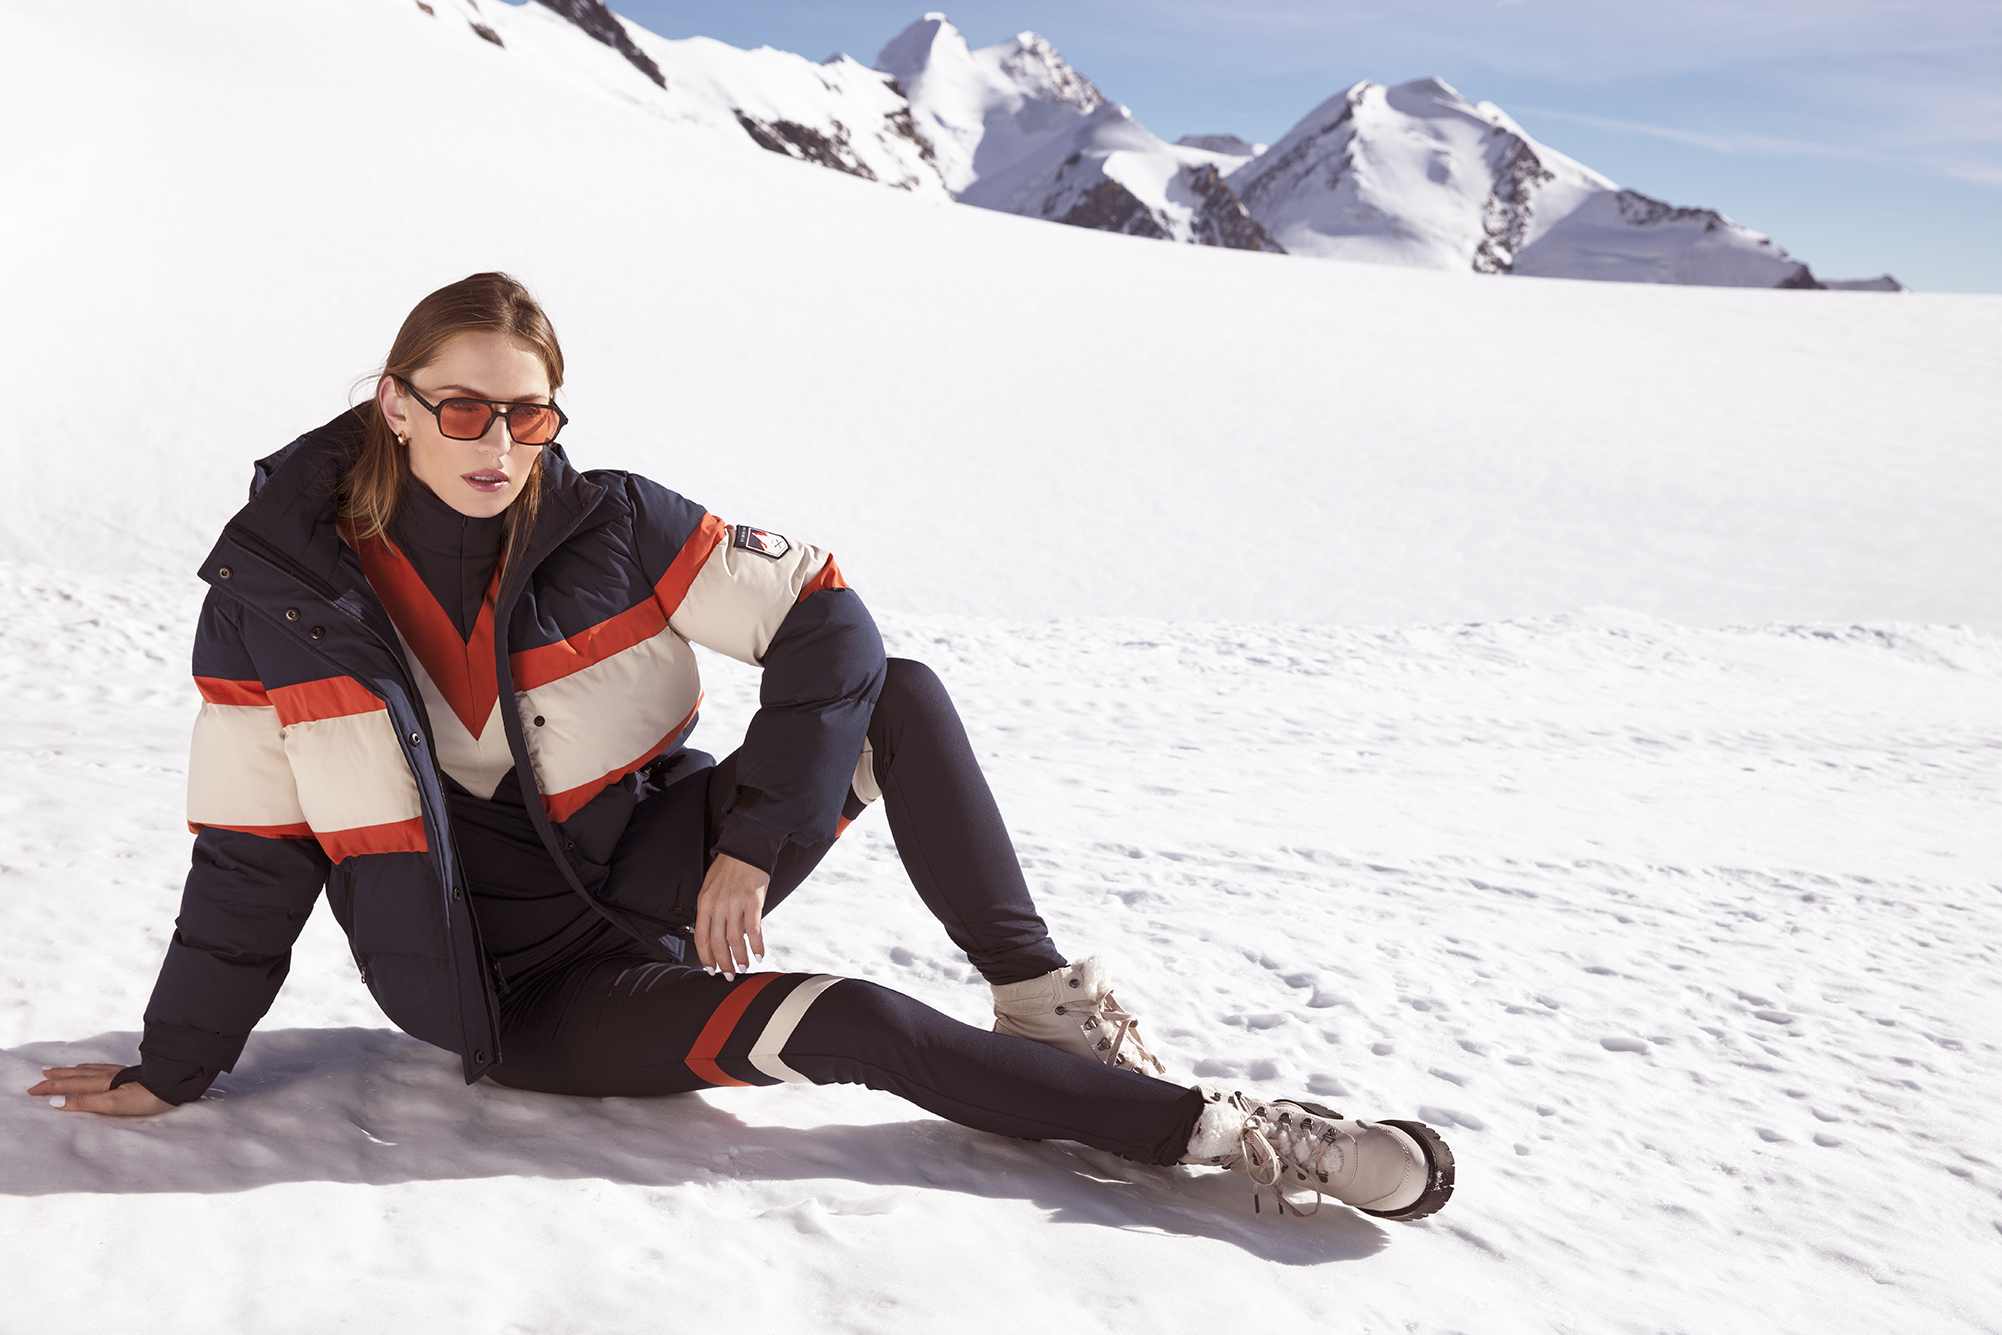 Why The Ski Capsule from By Malina is the ultimate ski collection you need for winter 21/22.